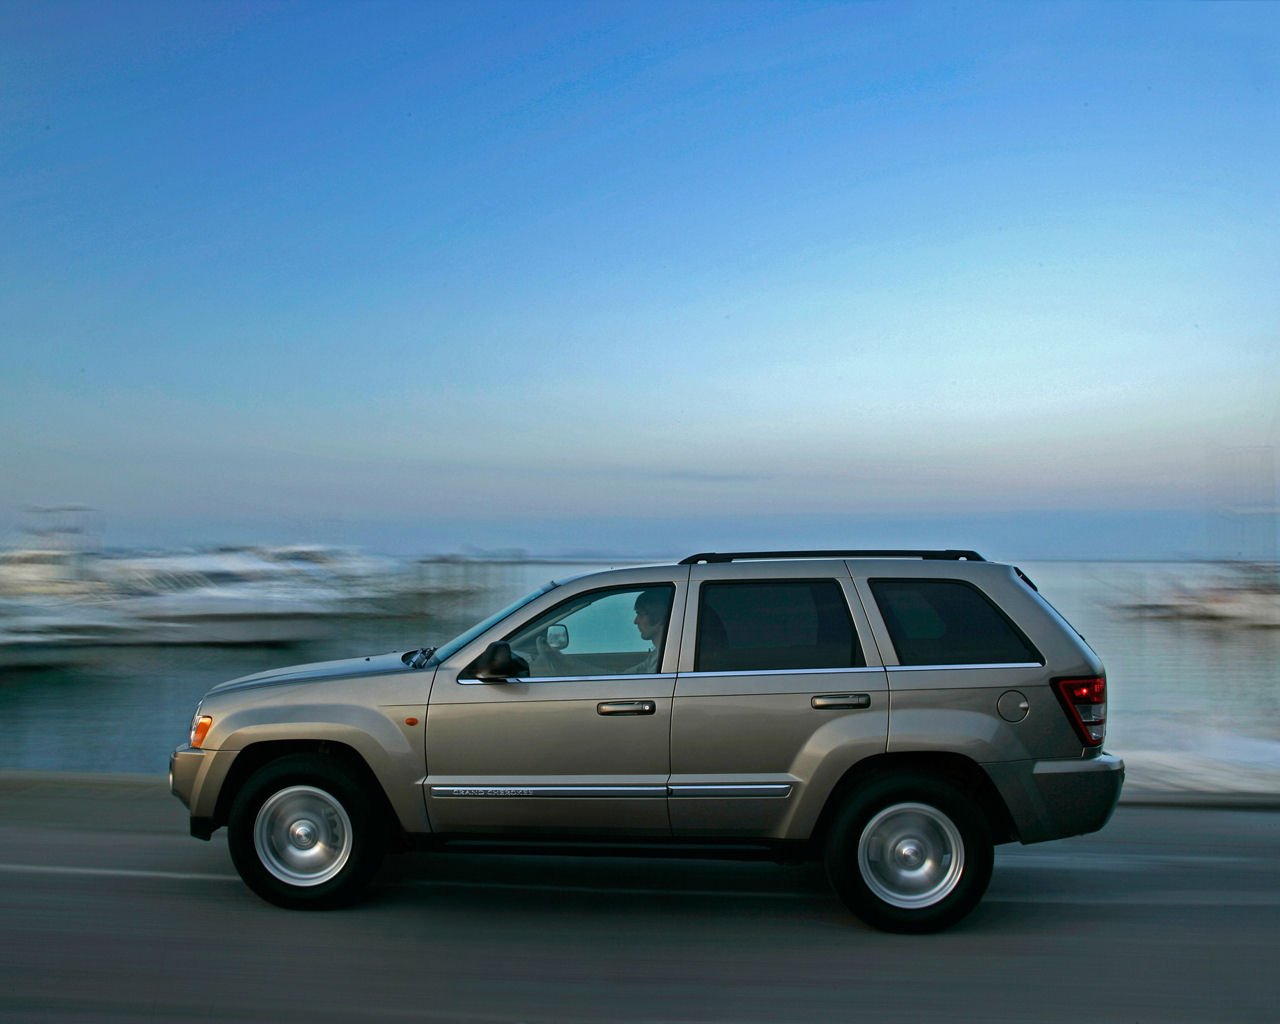 Please right click on the Jeep Grand Cherokee wallpaper below and